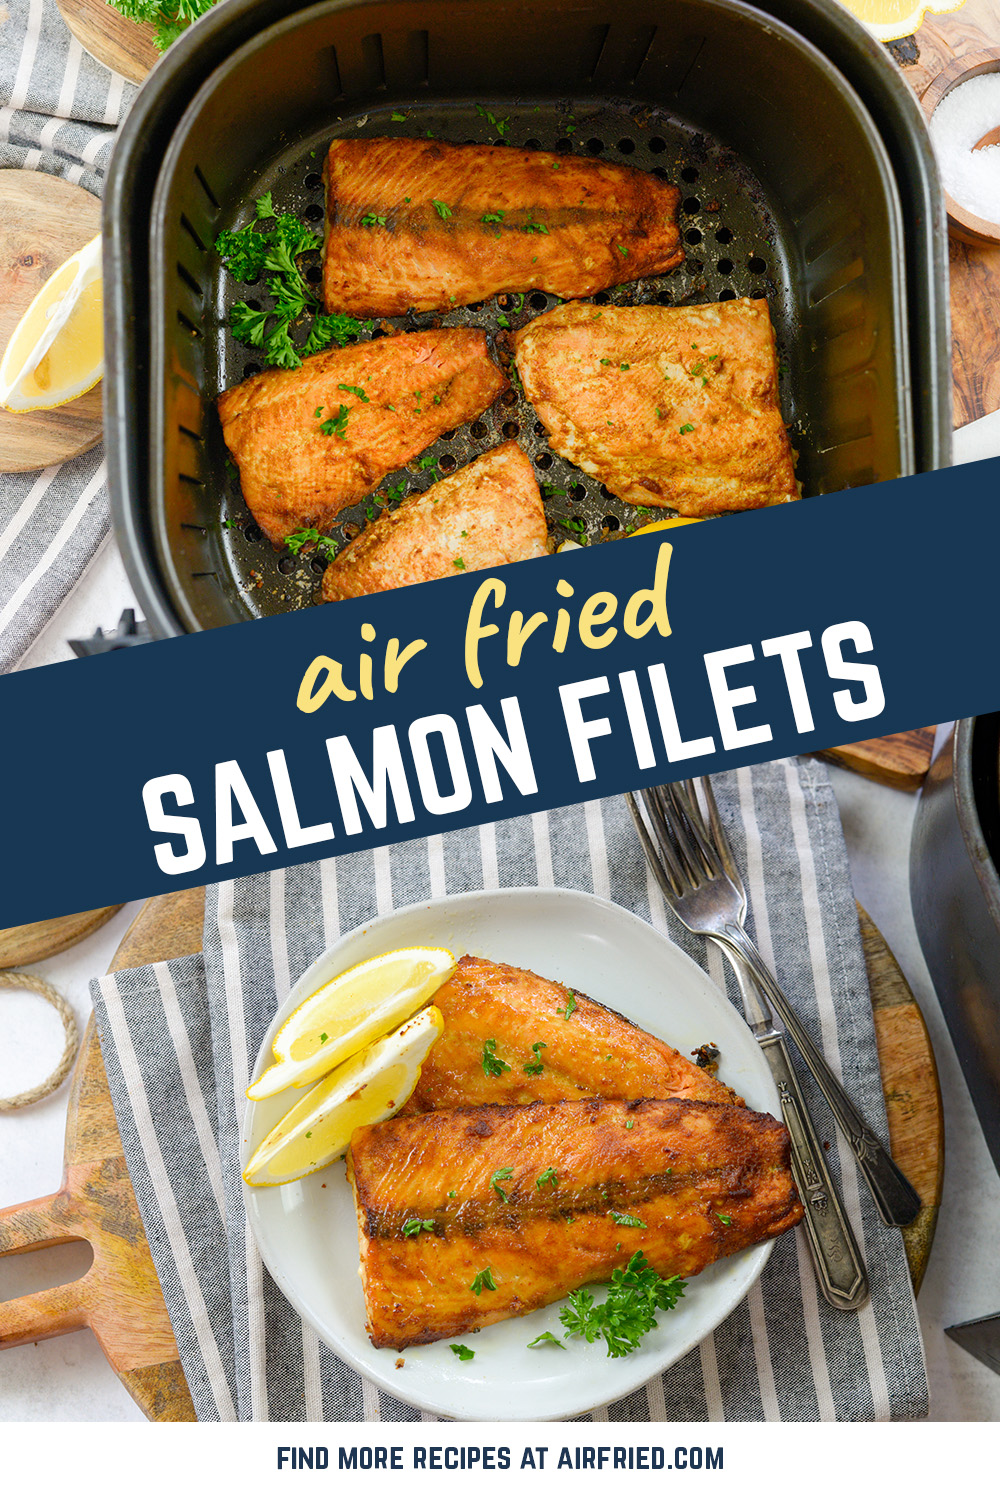 Our Air Fryer Frozen Salmon comes out just perfect in less than 15 minutes! It's an easy way to get a healthy dinner on the table and everyone loves this salmon topped with a lemon dijon sauce!